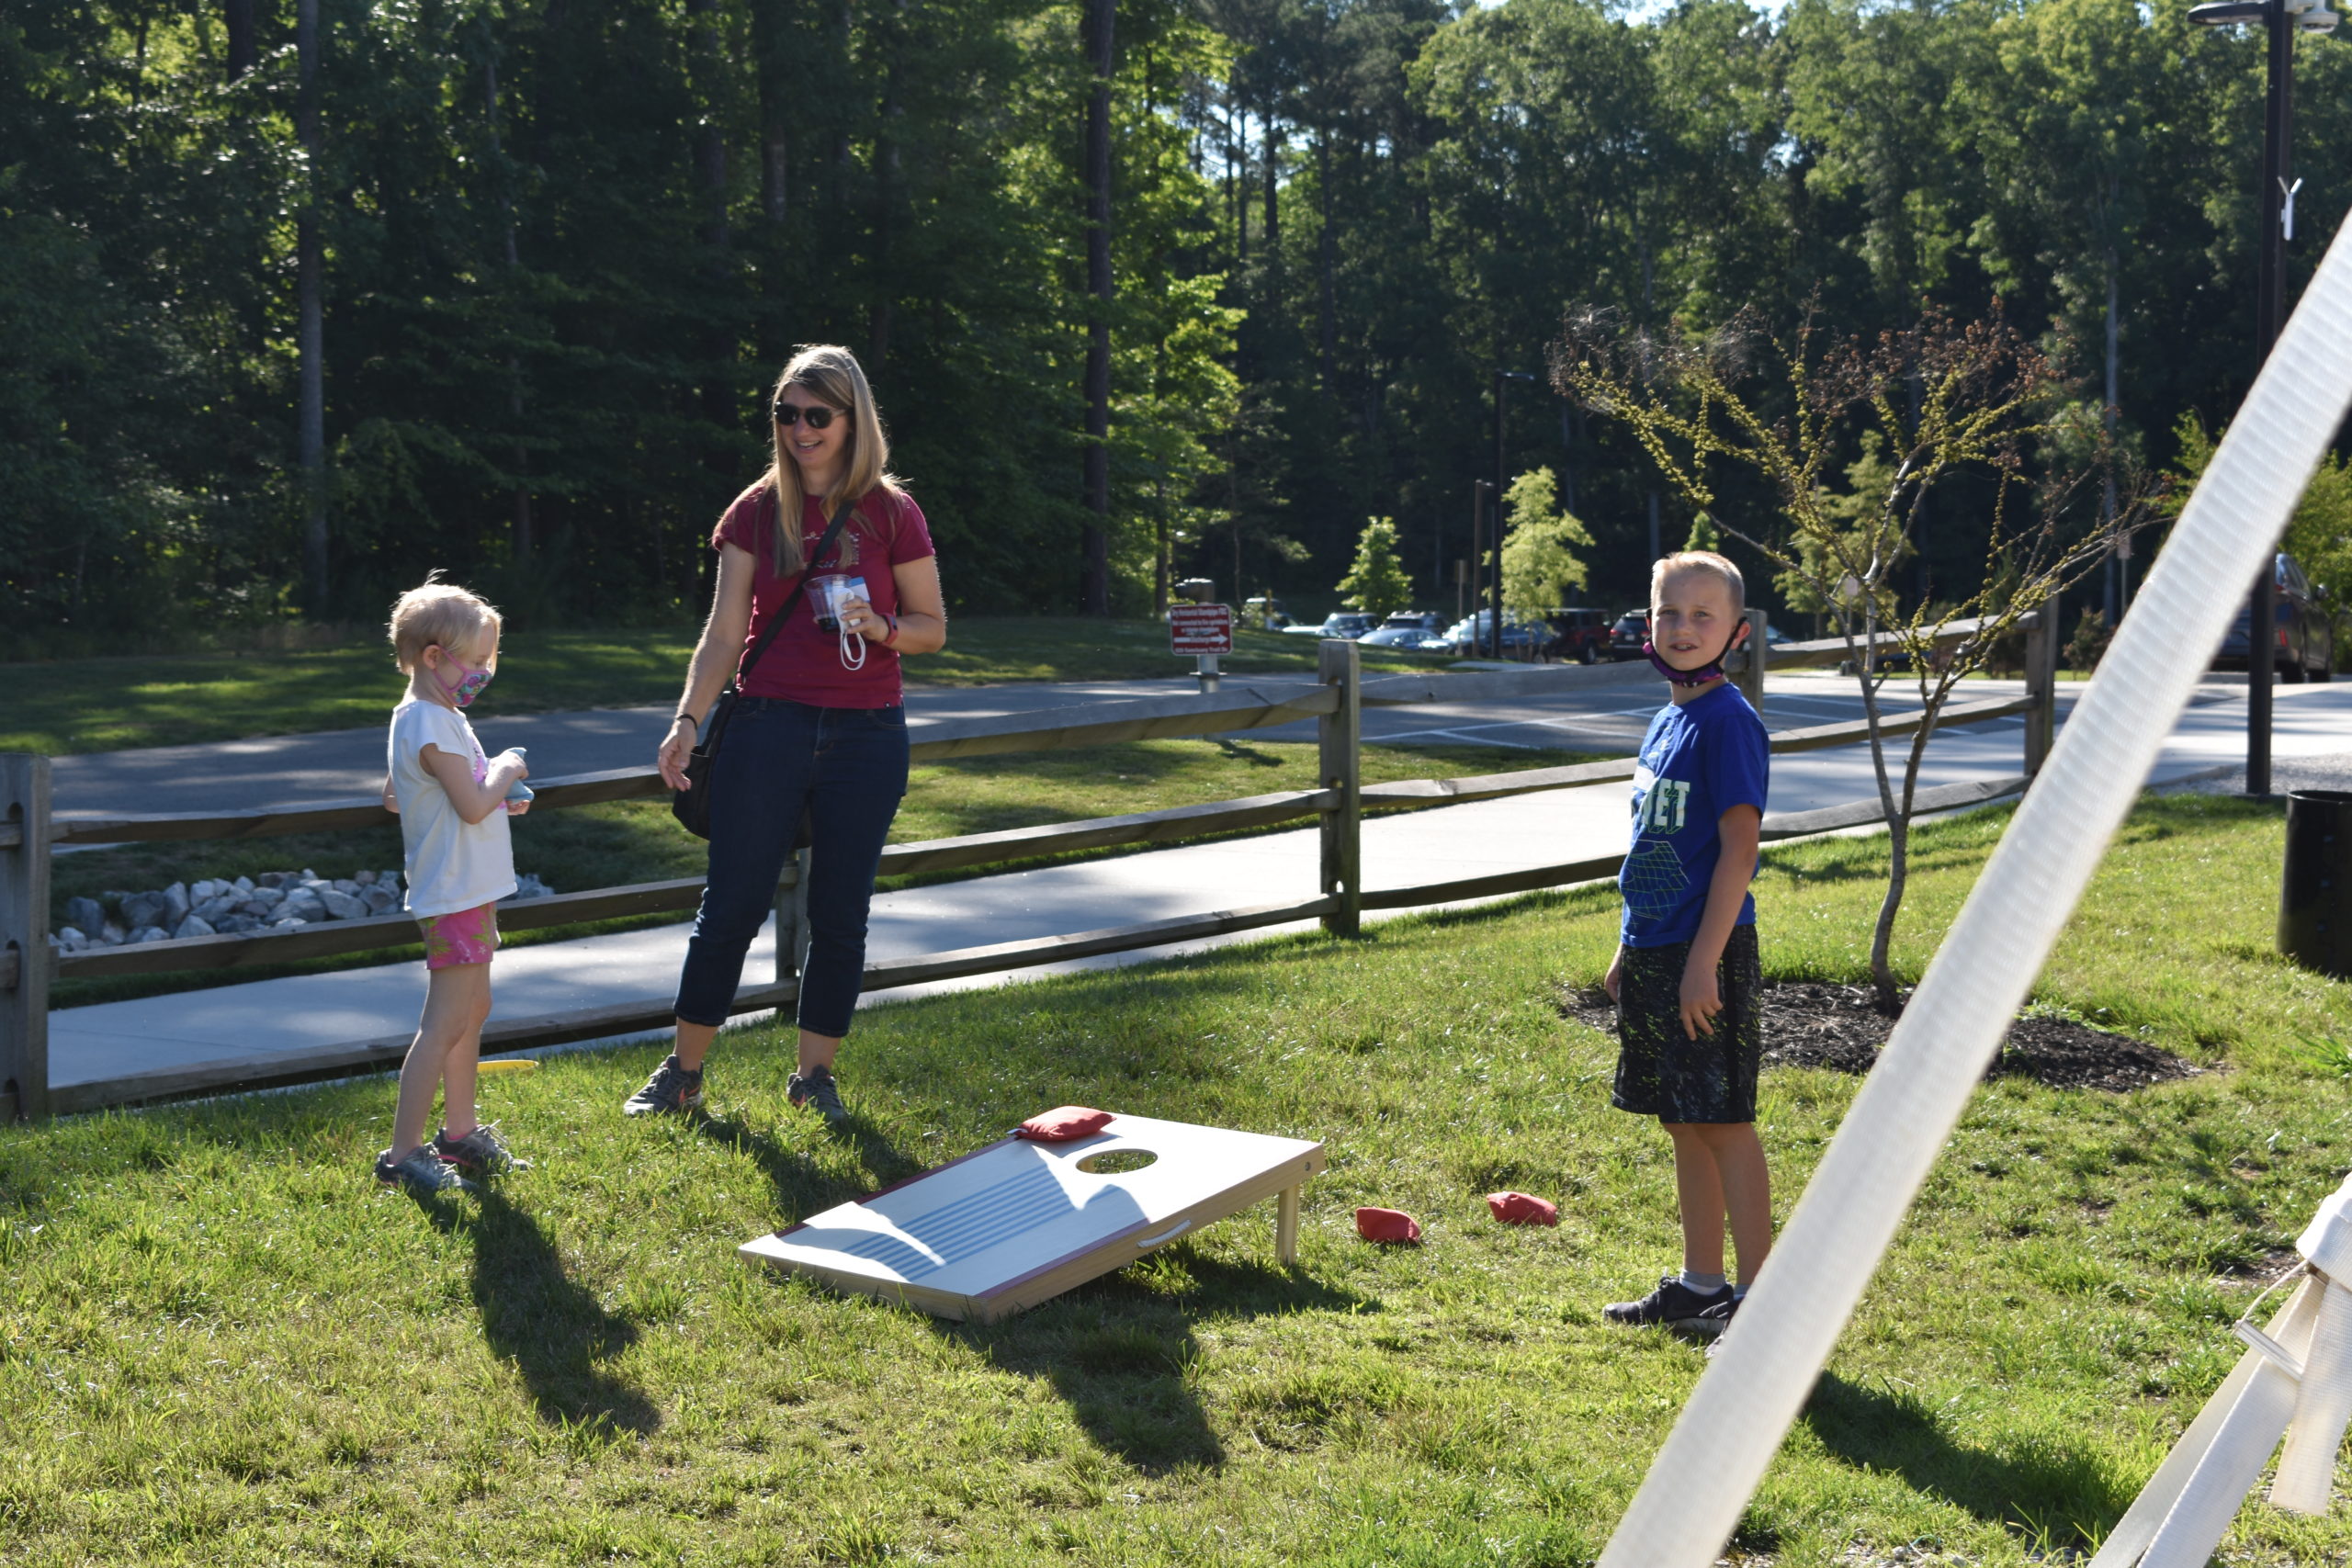 Image a parent playing cornhole with two children